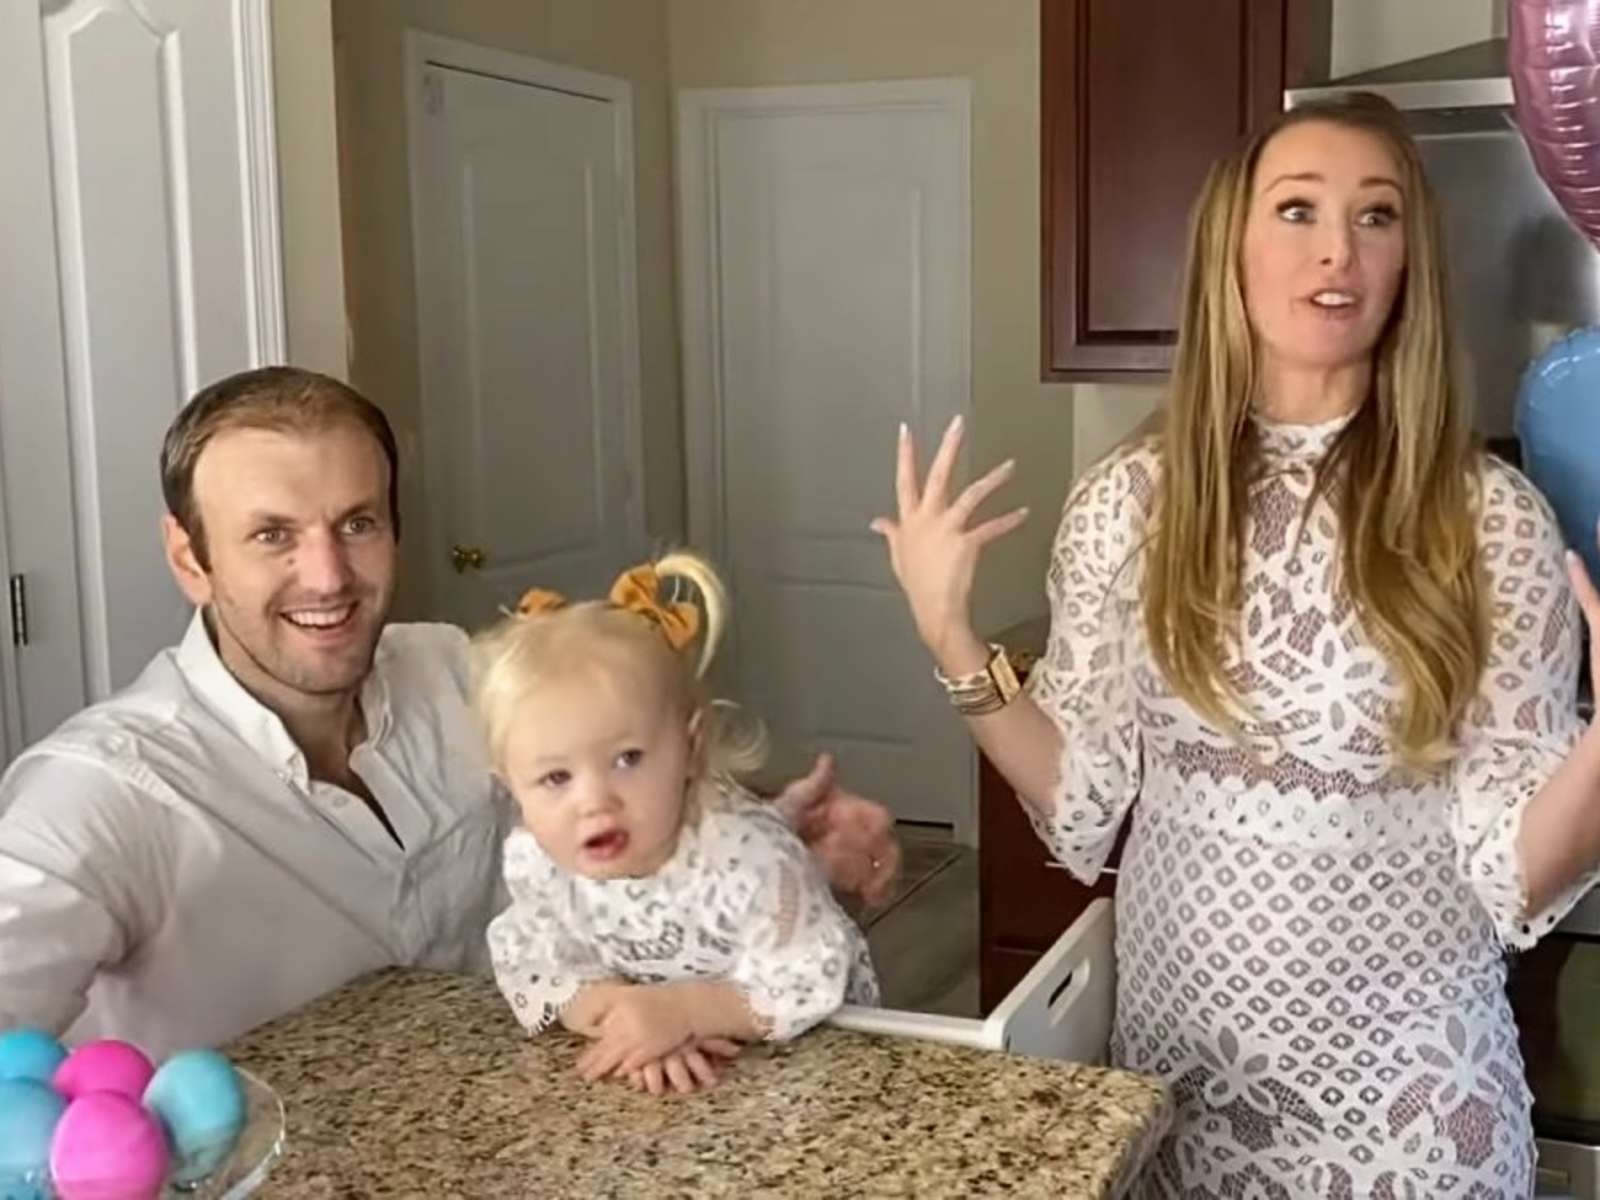 Married At First Sight Couple Jamie Otis And Doug Hehner Reveal Sex Of Baby At Big Gender